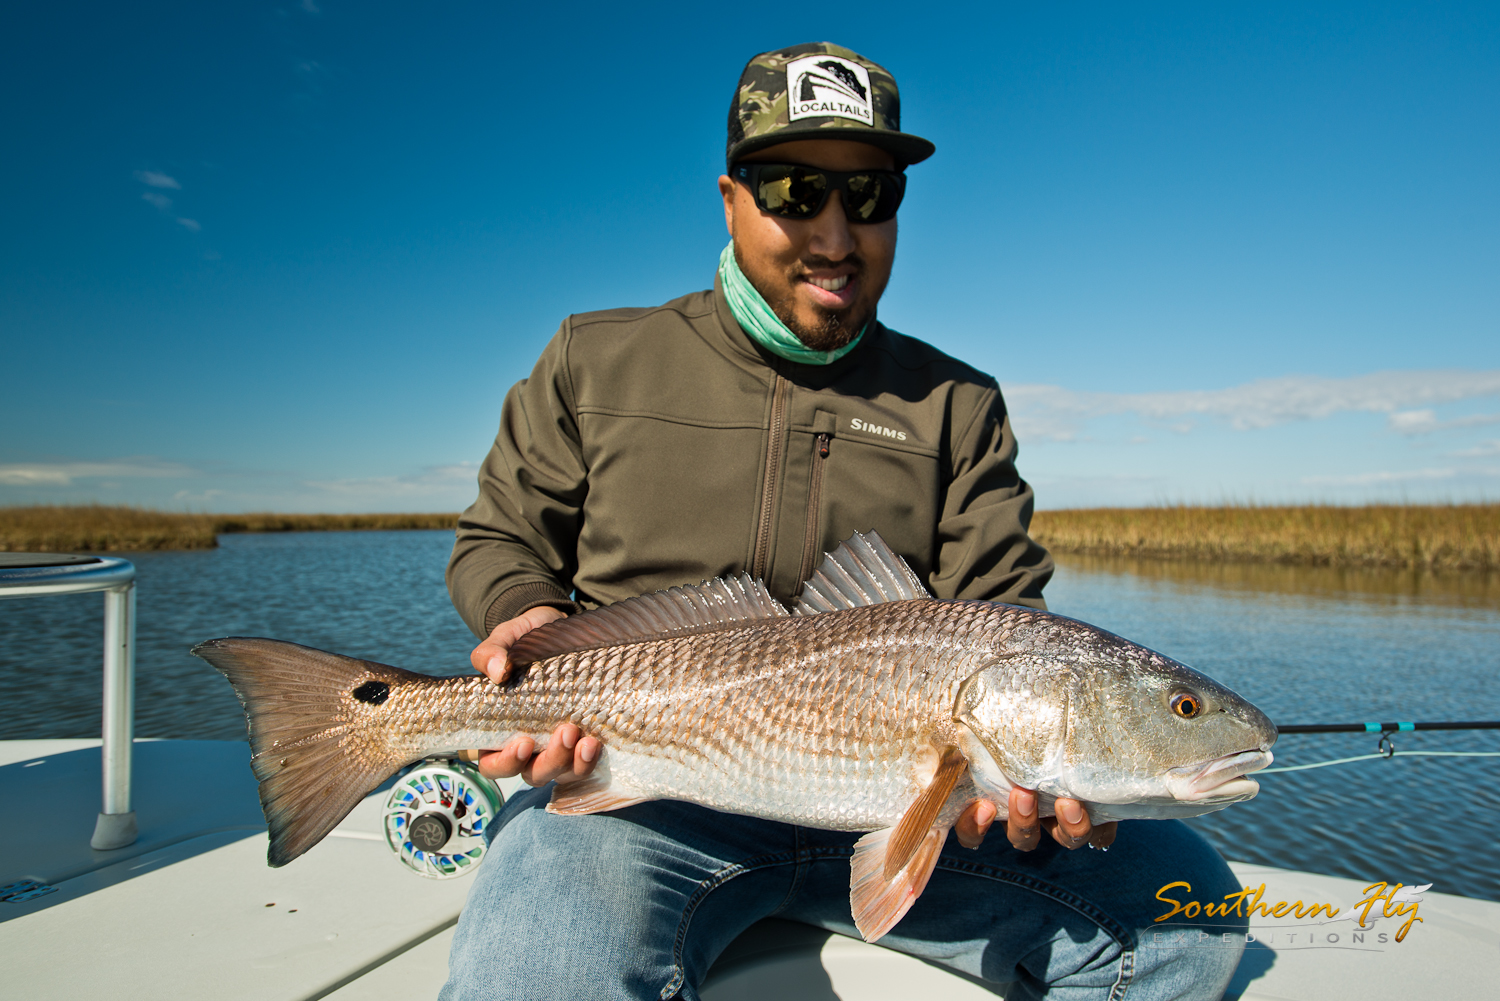 Fly Fishing Louisiana guides by Southern Fly Expeditions and Captain Brandon Keck 